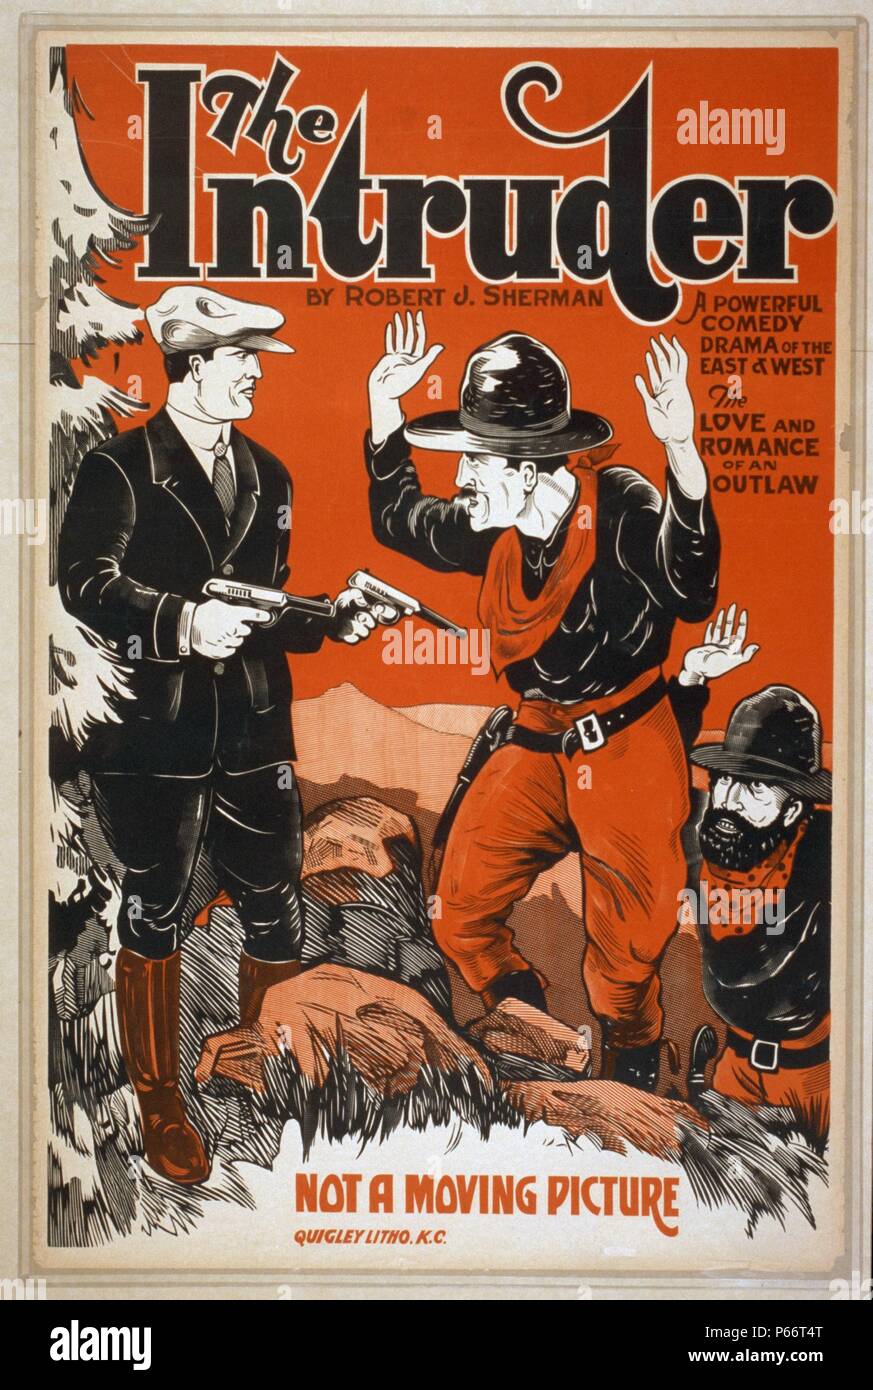 1910 The intruder a powerful comedy drama of the East & West (the love and romance of an outlaw), by Robert J. Sherman. Died 1939. Stock Photo